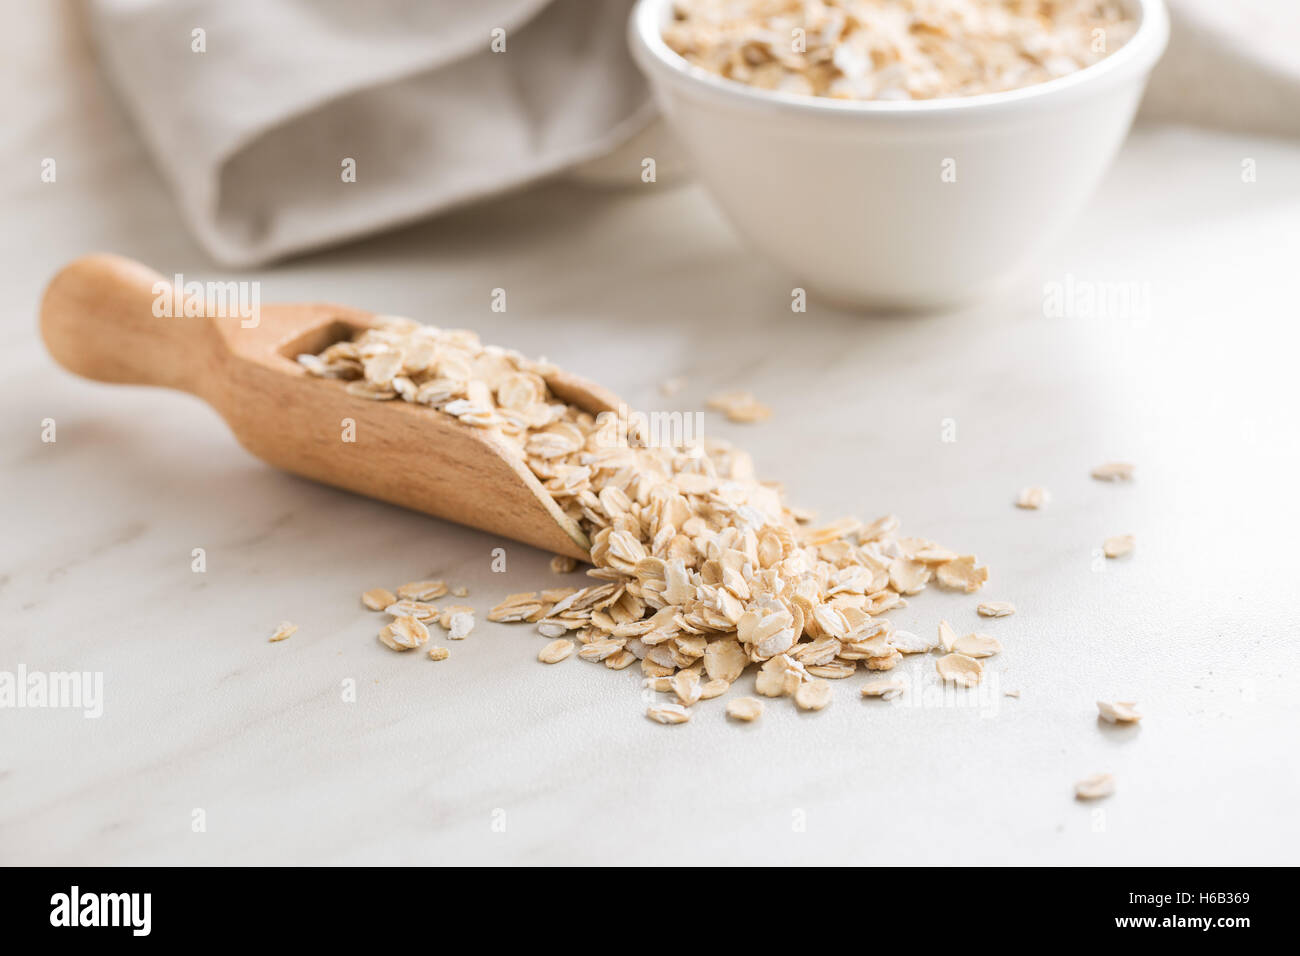 Dry rolled oatmeal in wooden scoop. Stock Photo